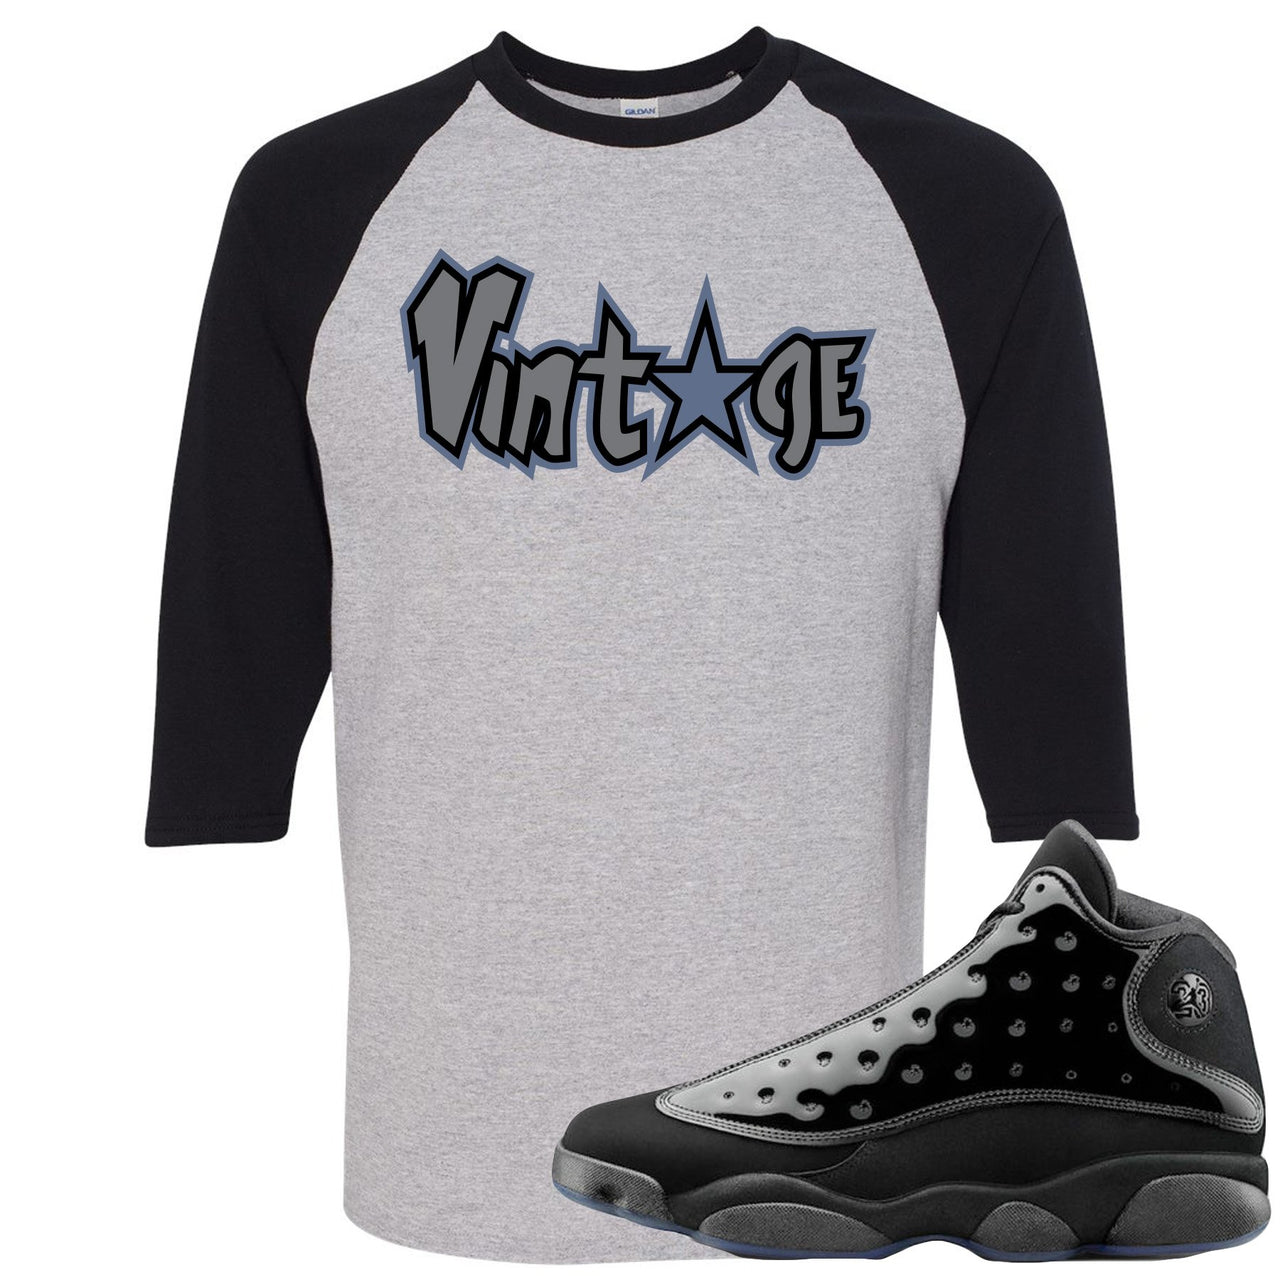 Cap and Gown 13s Raglan T Shirt | Vintage Star Logo, Black and Sports Grey